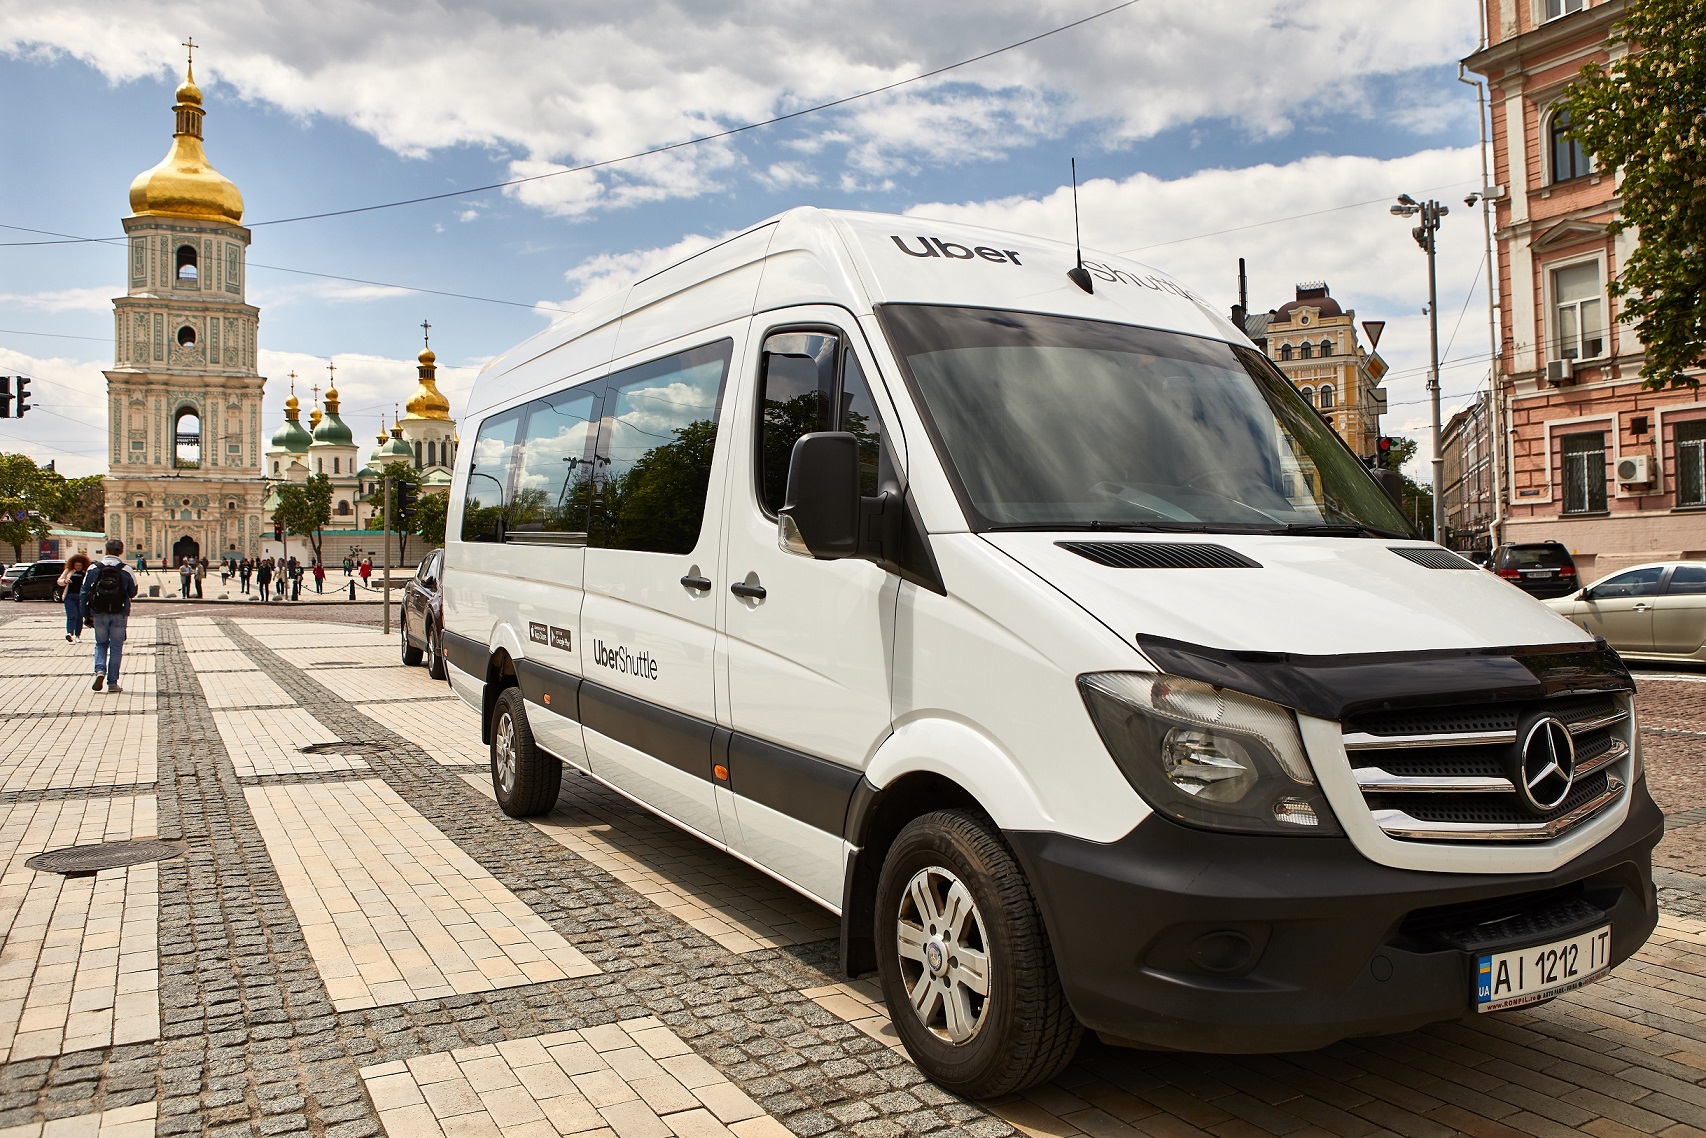 An Uber Shuttle minibus is parked in central Kyiv. Uber mostly uses Mercedes-Benz Sprinter minibuses for this service. (Uber)